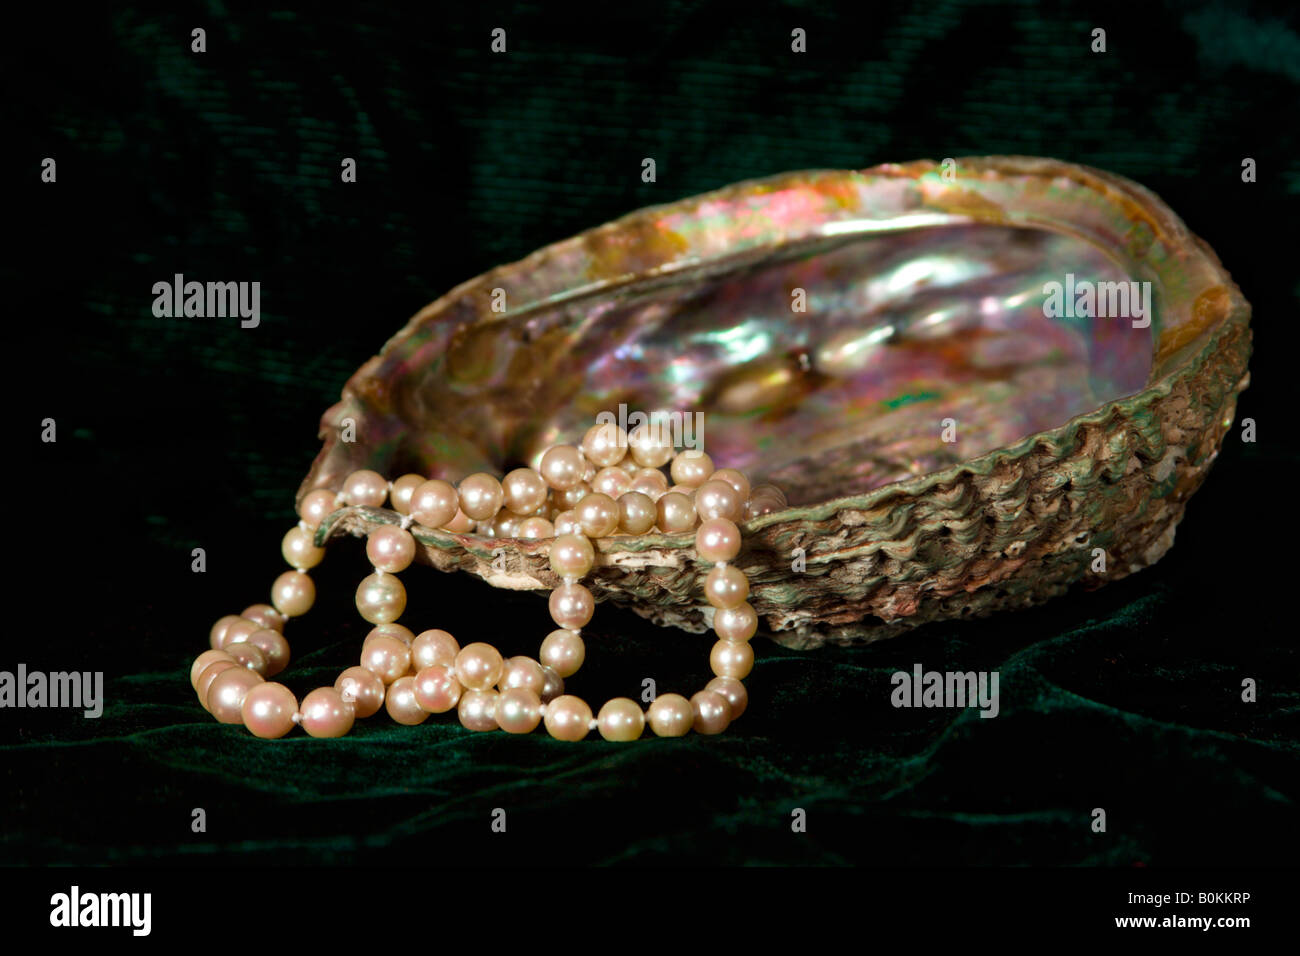 Pearls in a mother-of-pearl shell. Stock Photo